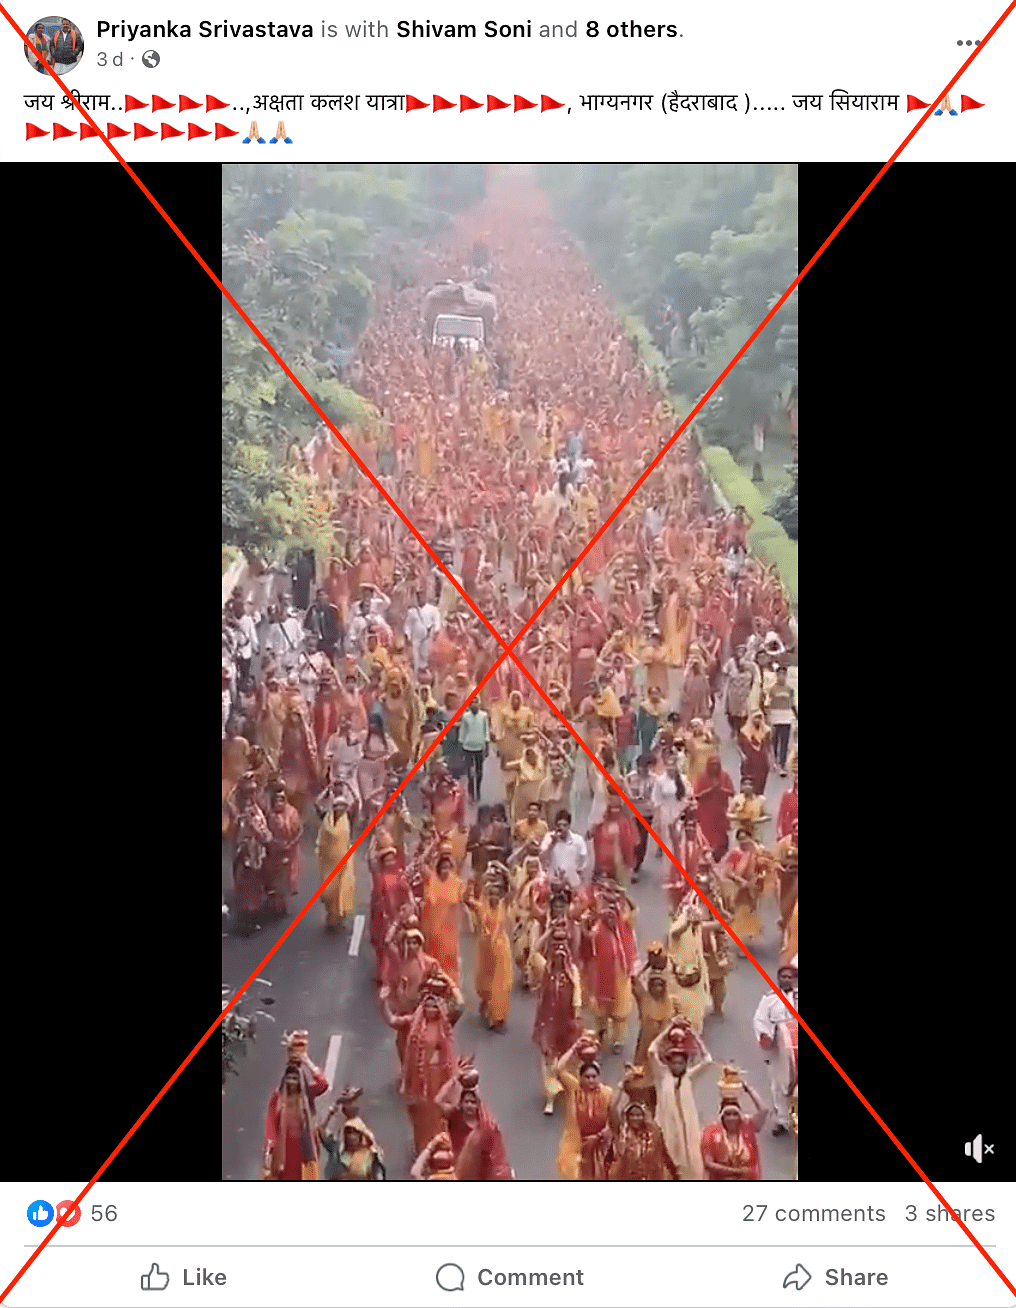 The video shows a procession for godman Bageshwar Dham Sarkar which was held in Uttar Pradesh's Greater Noida.